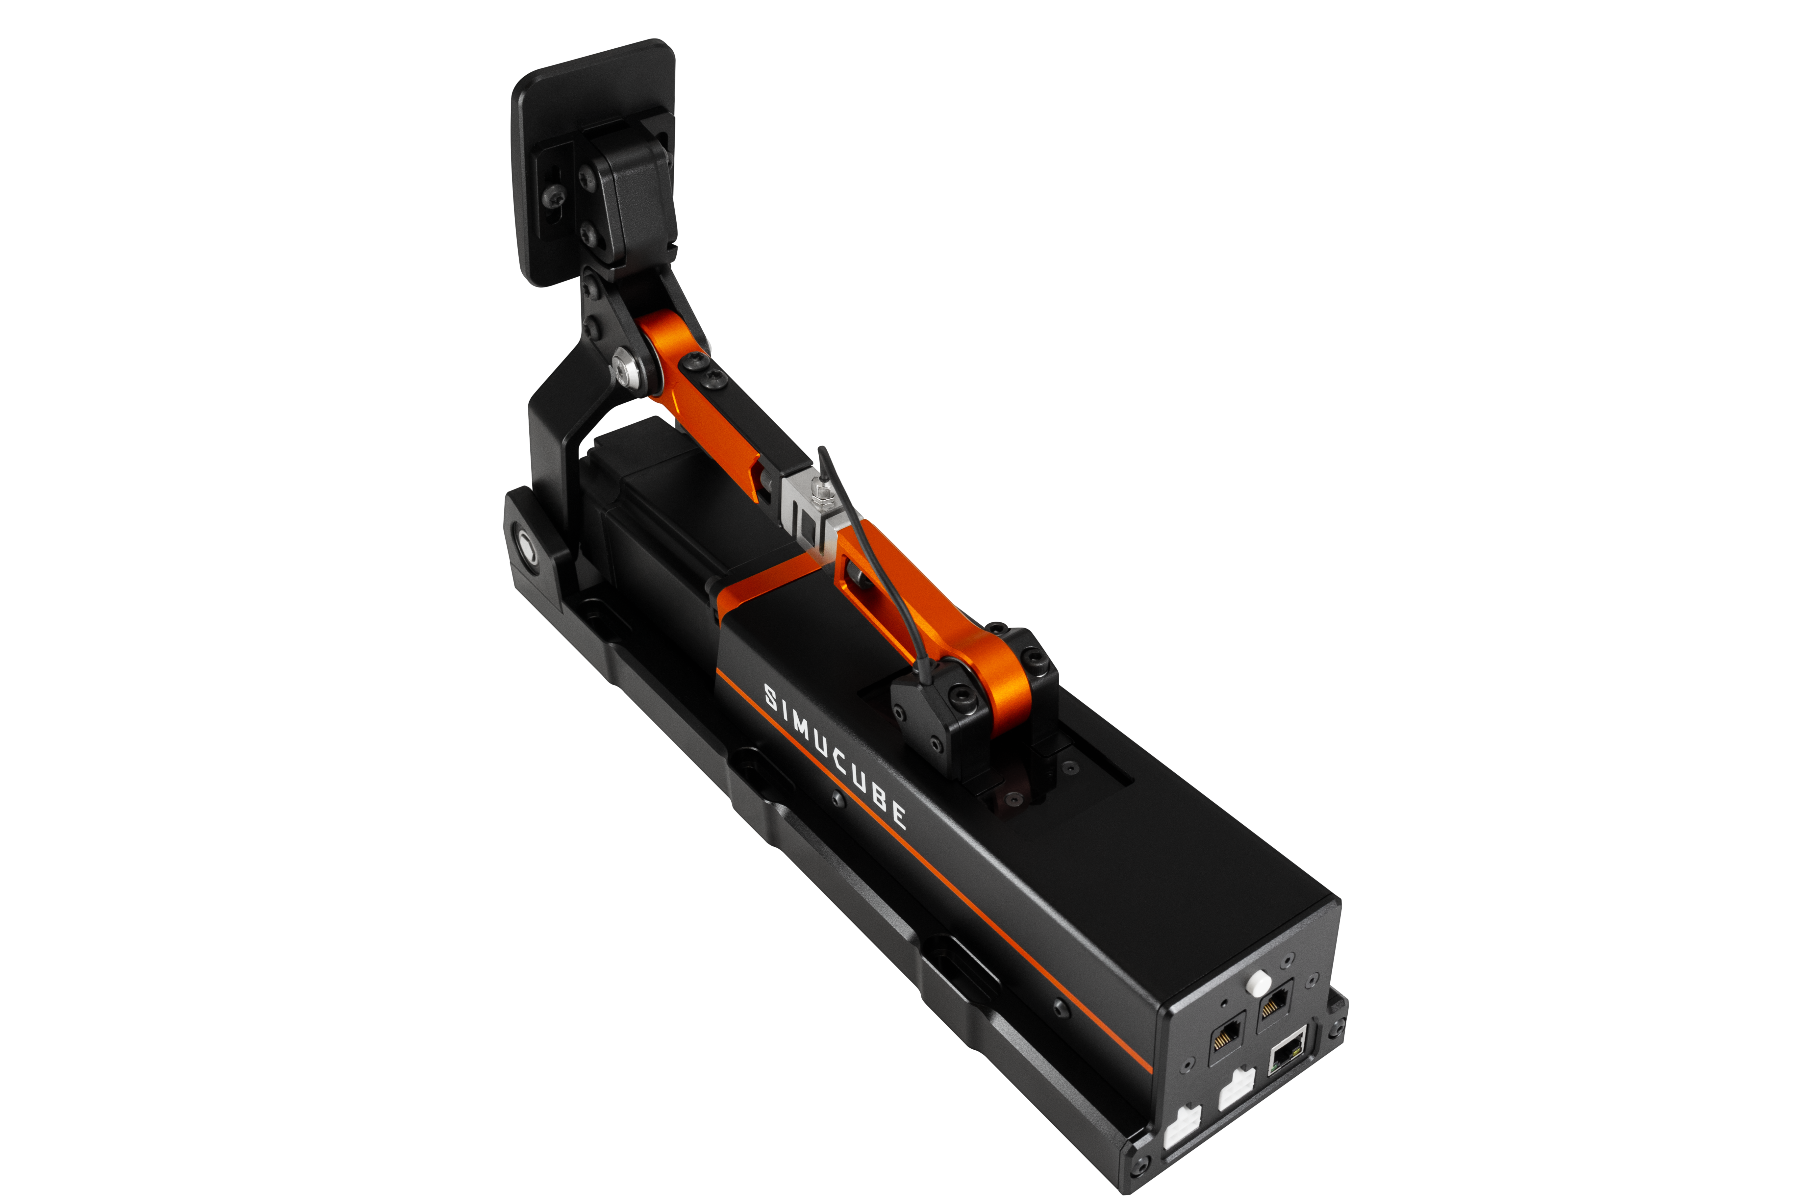 SIMUCUBE ACTIVEPEDAL